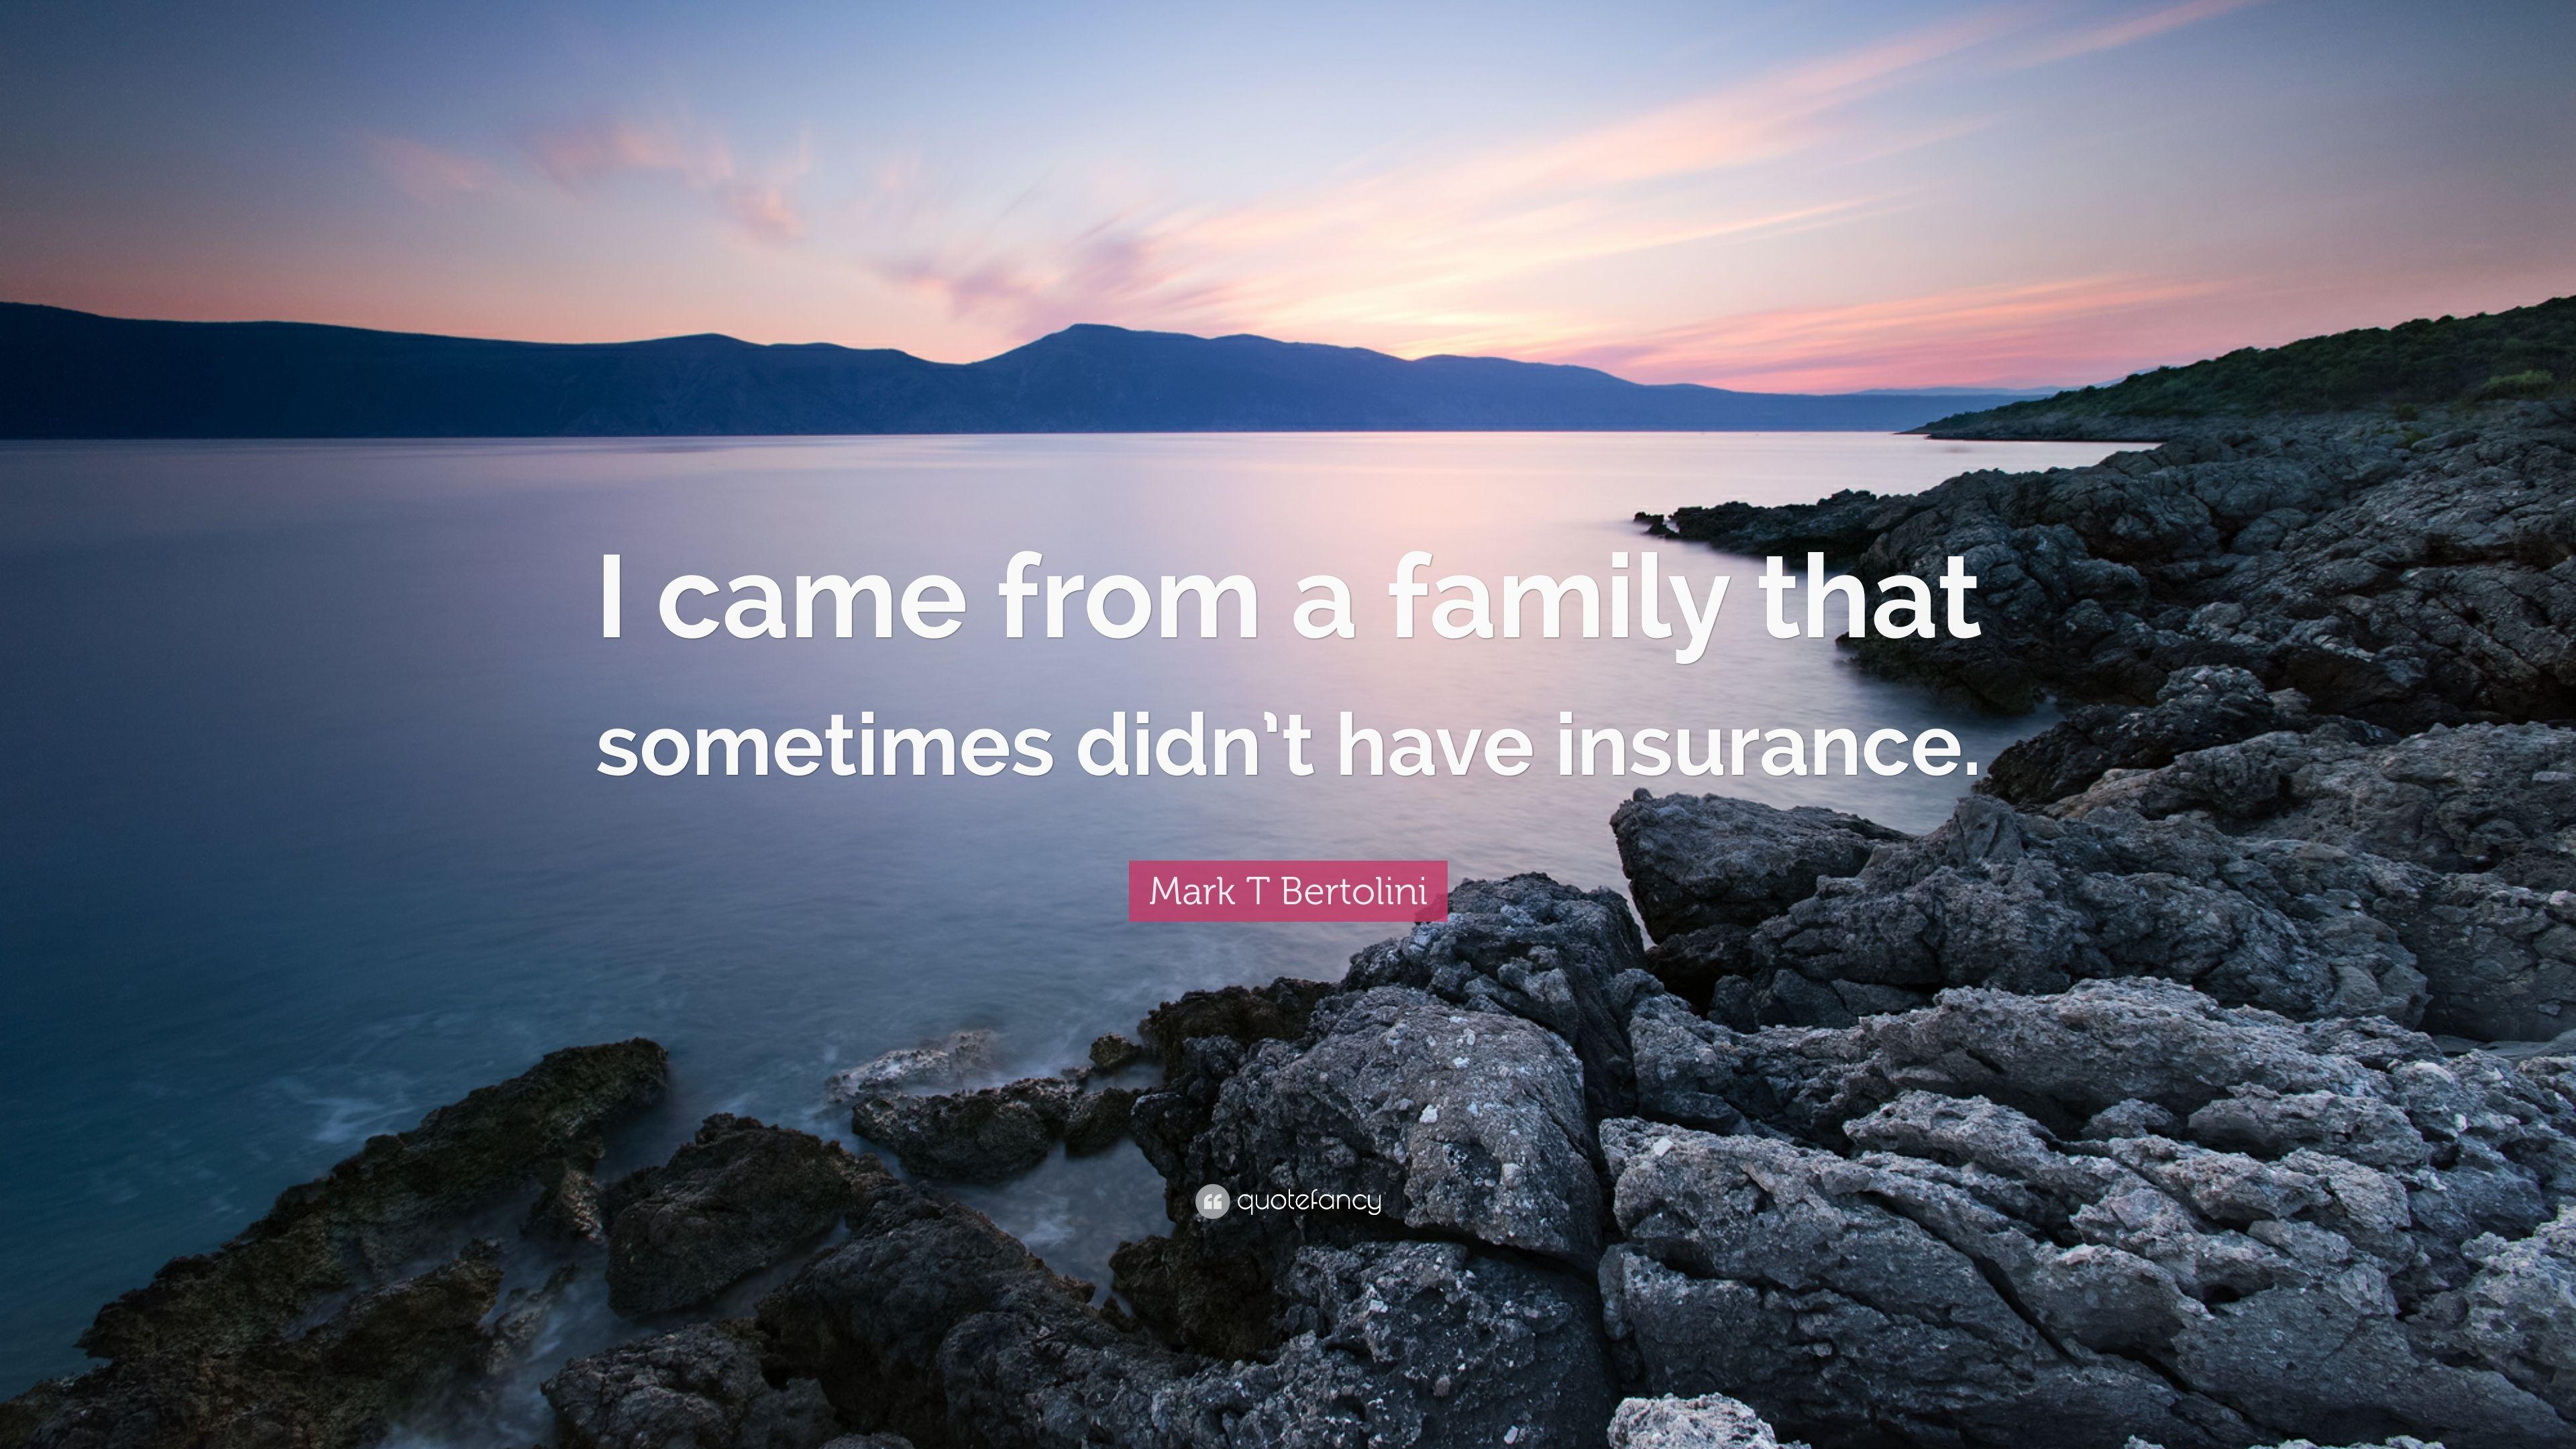 Mark T Bertolini Quote: “I came from a family that sometimes didn't